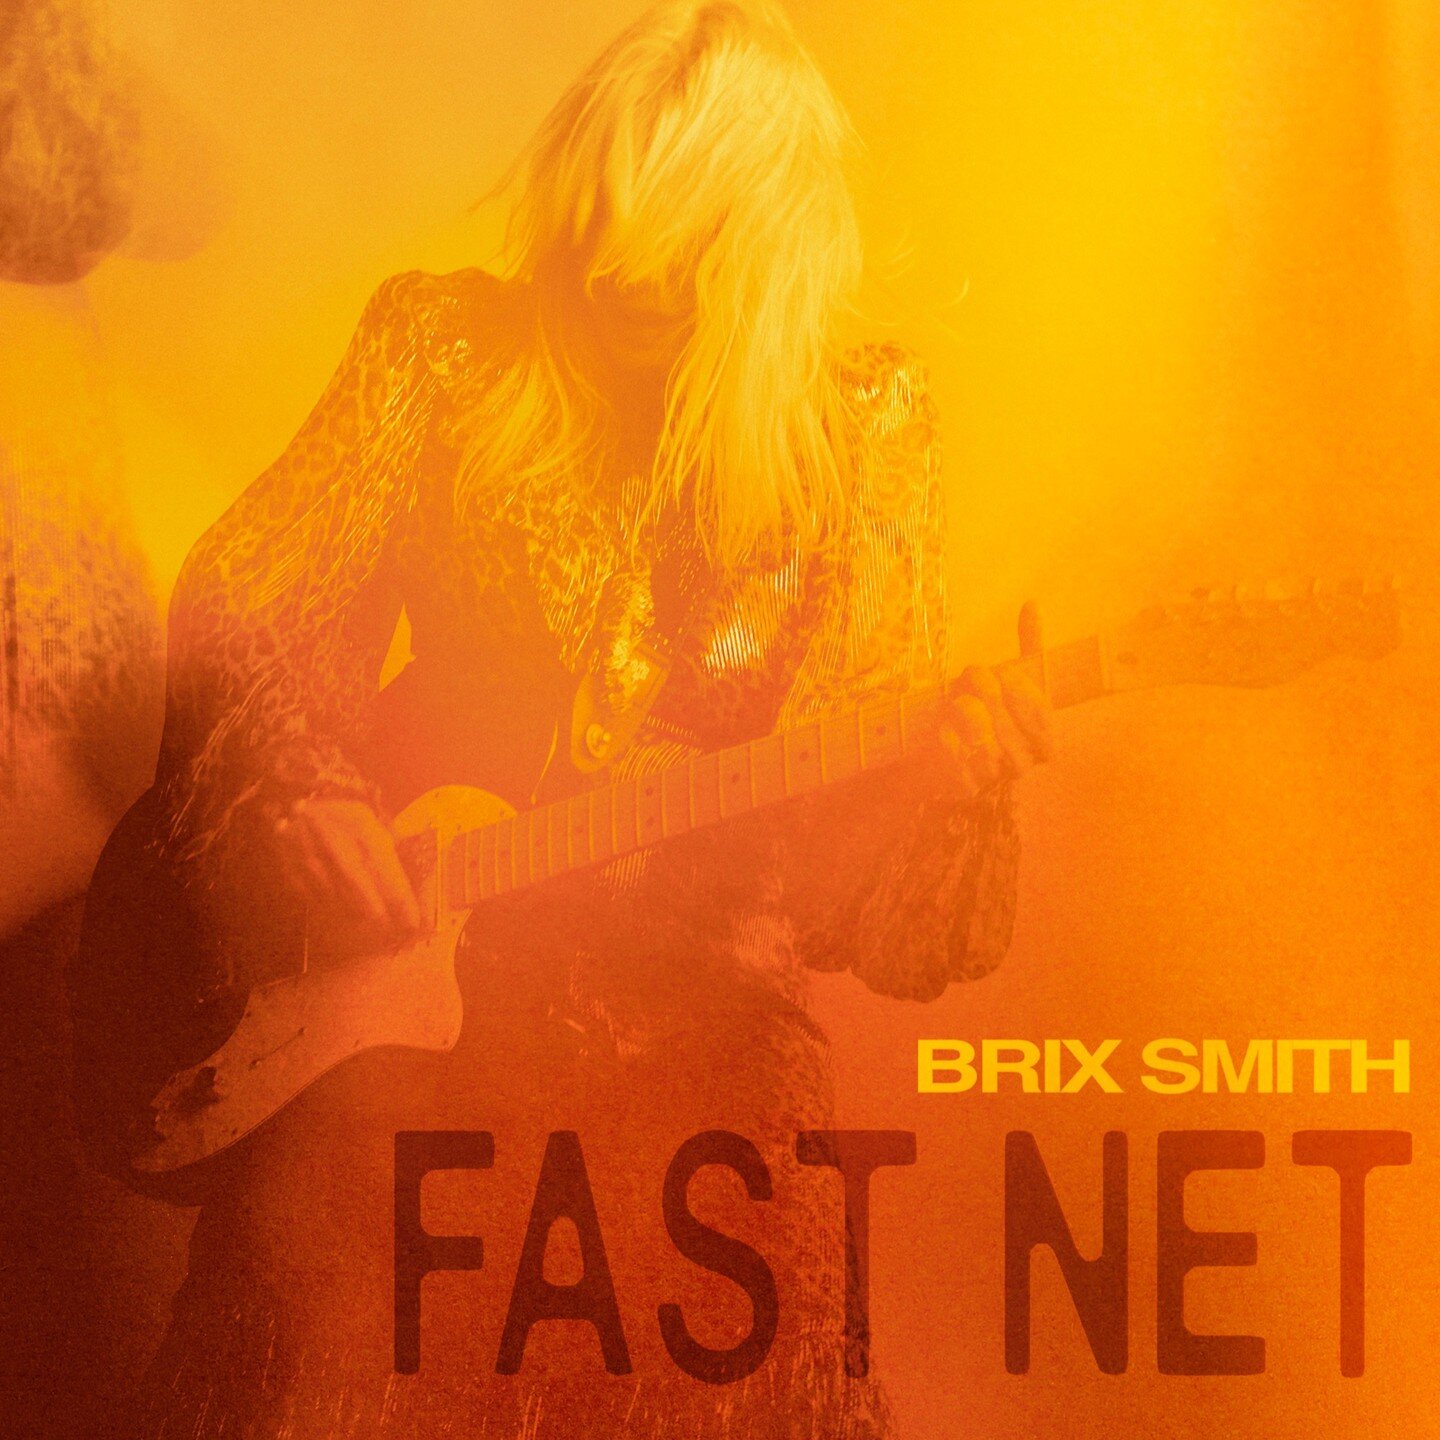 Brix Smith – “Fast Net” Music Video OUT NOW